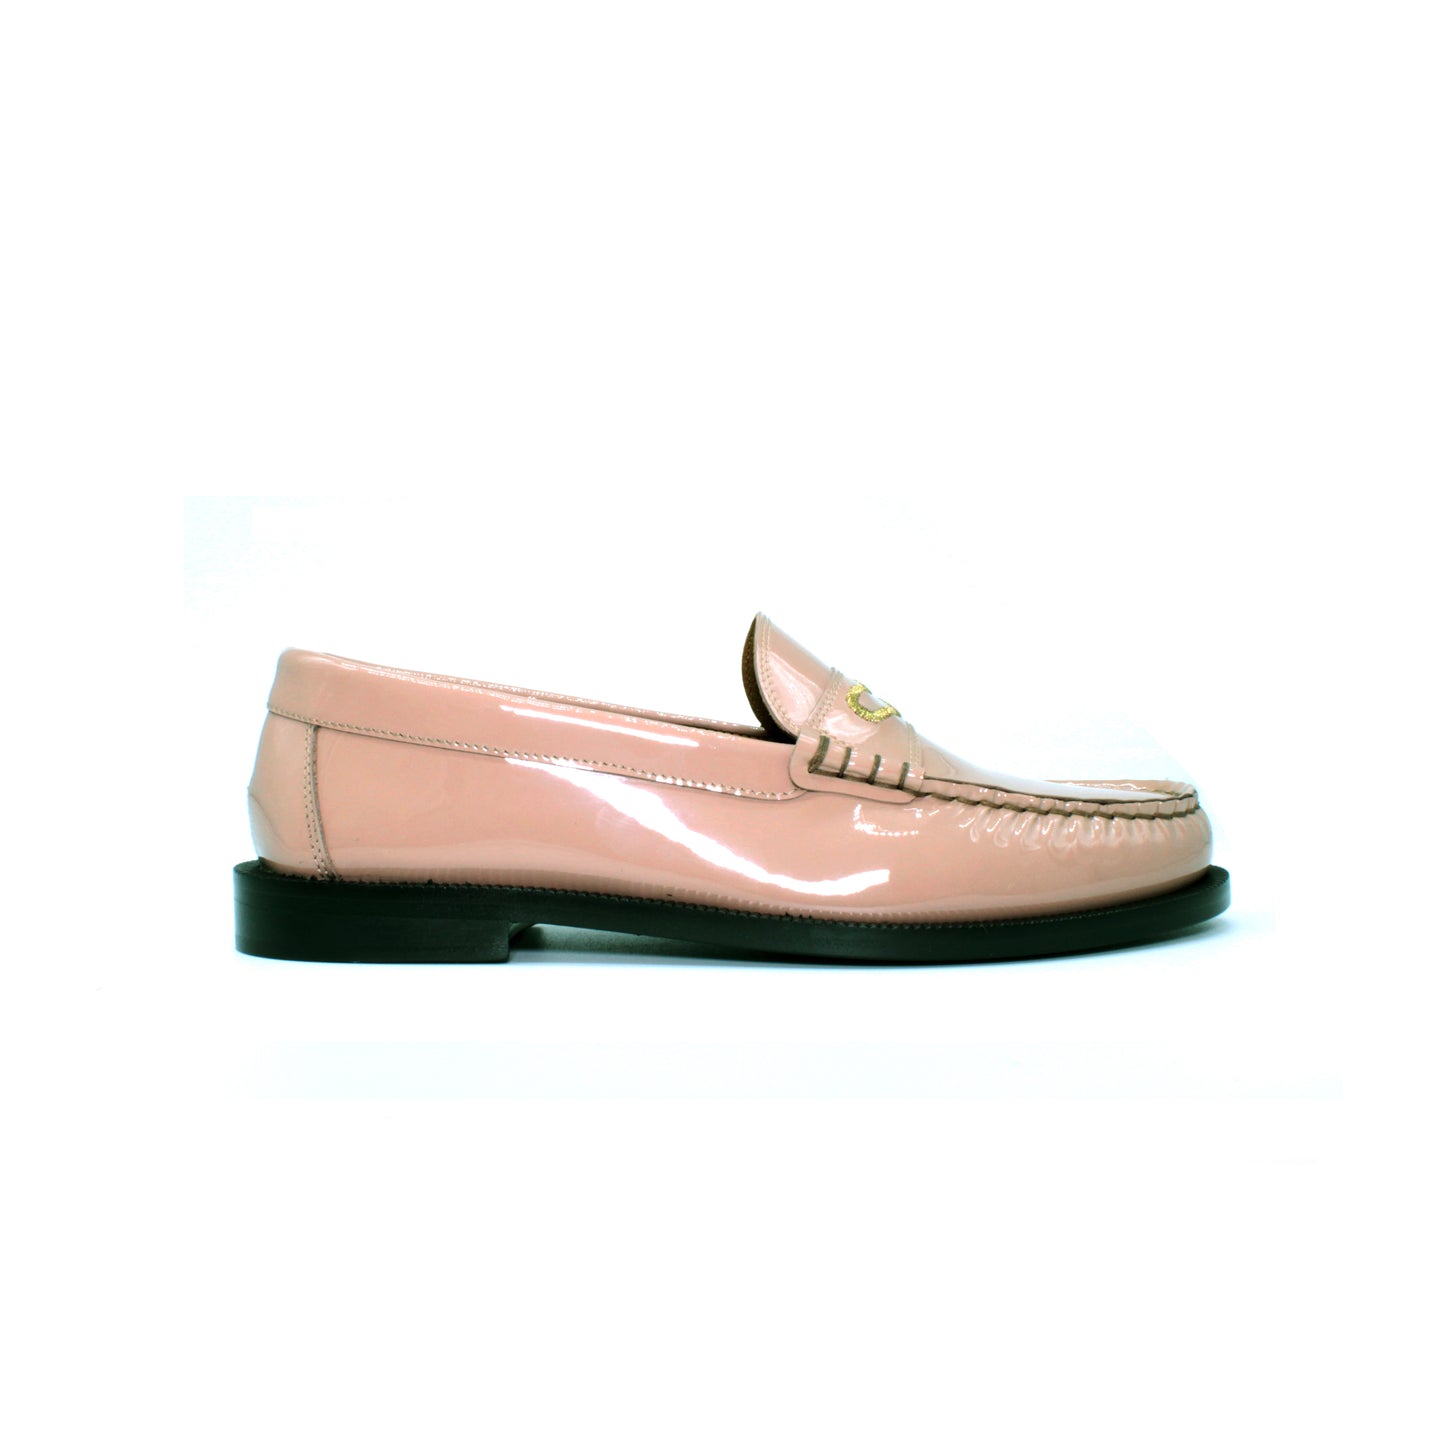 Moccasin in tutu color patent leather